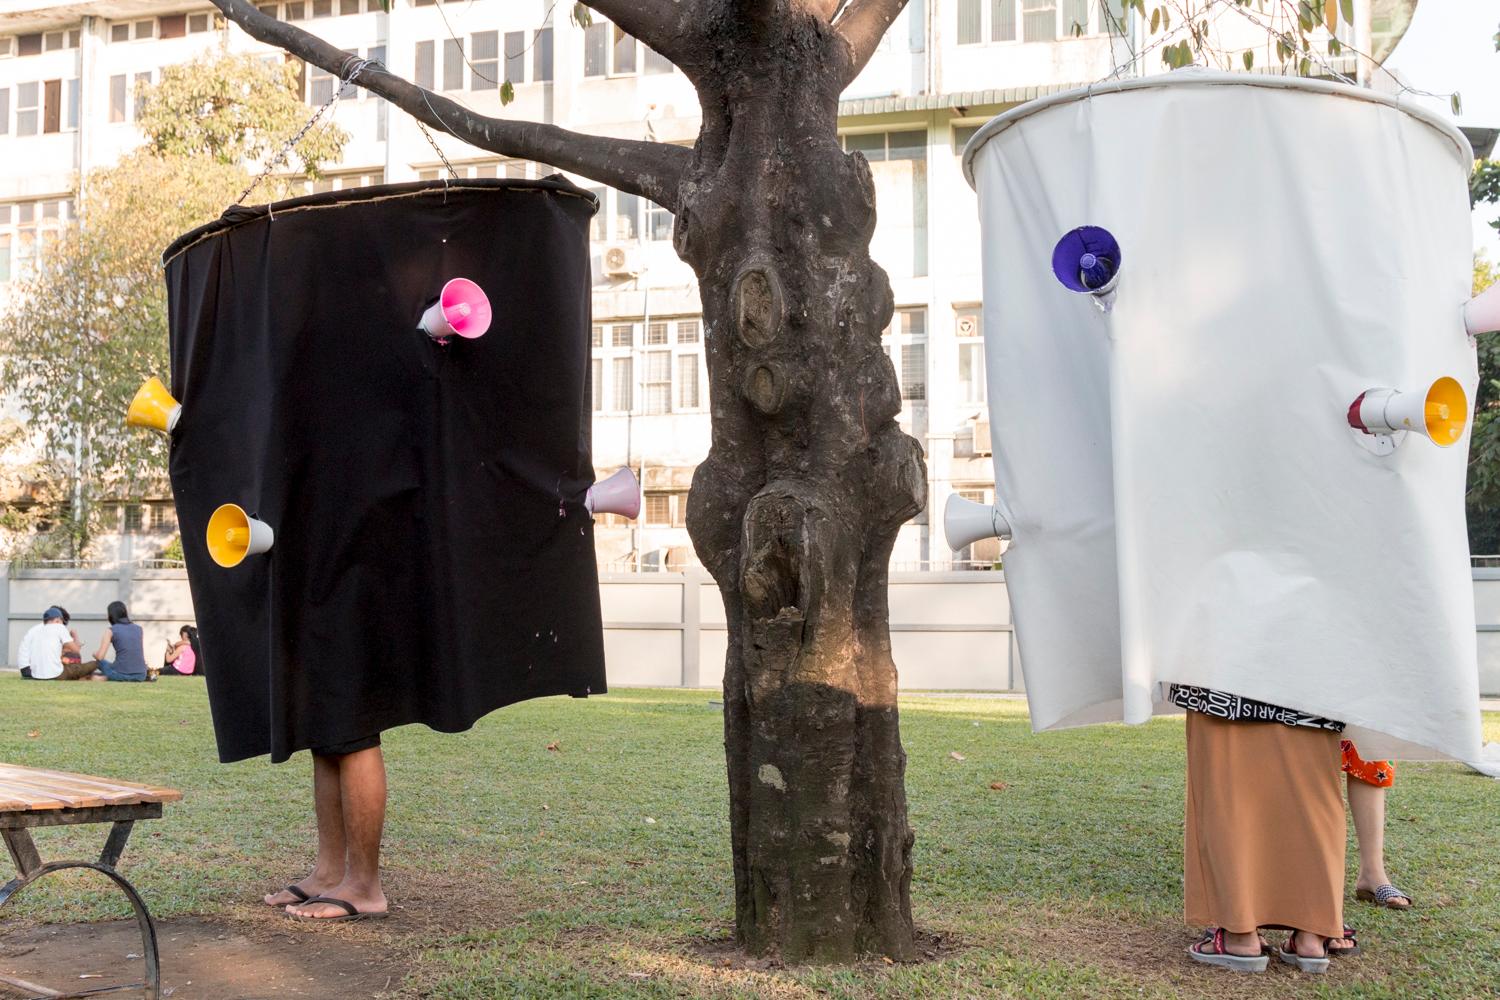 People in a Yangon try out the "soundsuit," an art installation that's designed to draw attention to noise. "Maybe once people hear what they sound like," says one of the creators, "they'll reduce the noise."